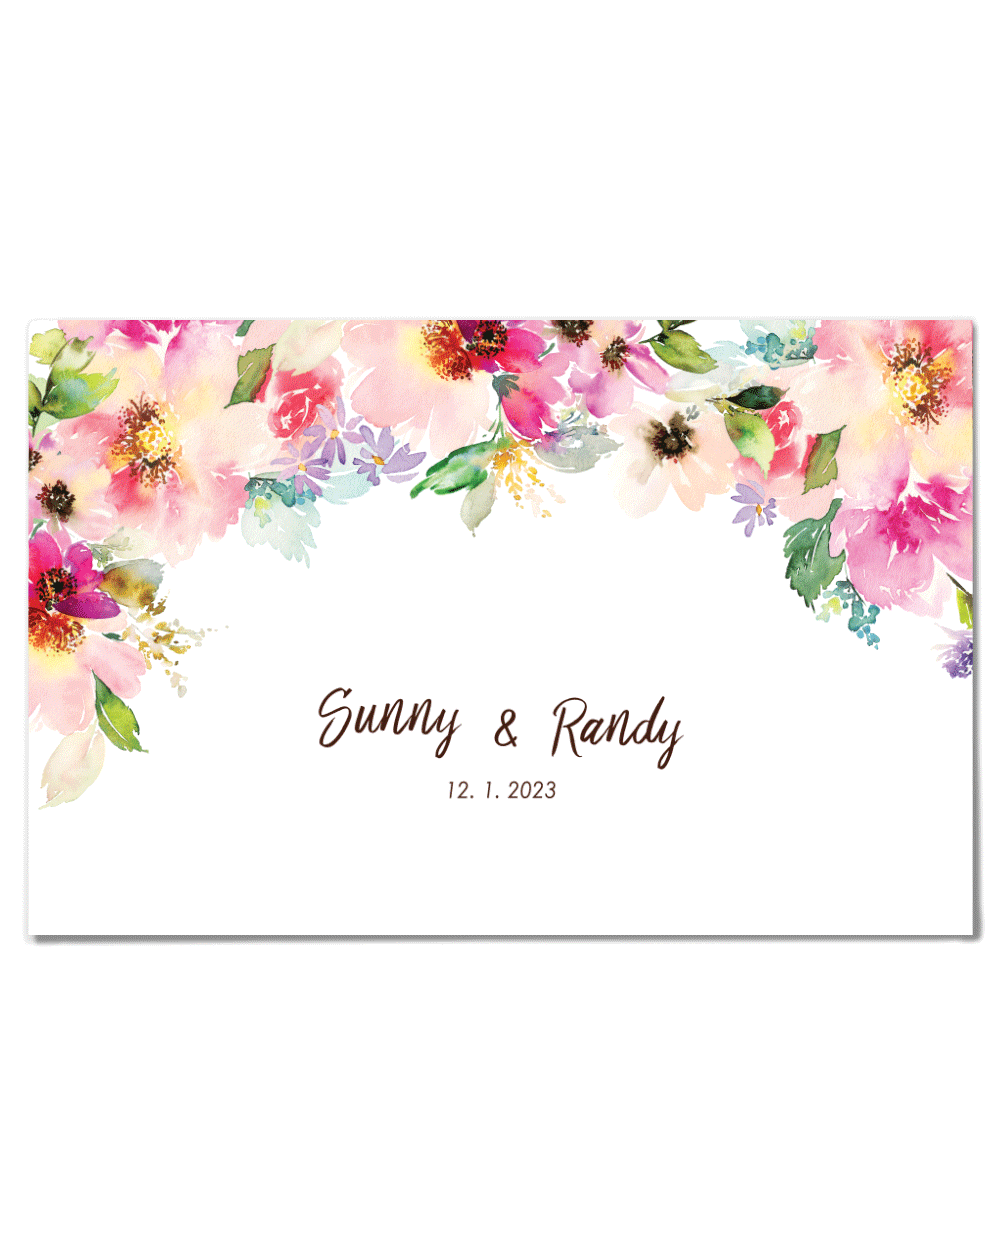 Sunny& Randy-17"x11" 50pcs, Disposable Place Baby Showers, Bridal Shower Table Setting Seasonal Party Kitchen Home Decor Dining